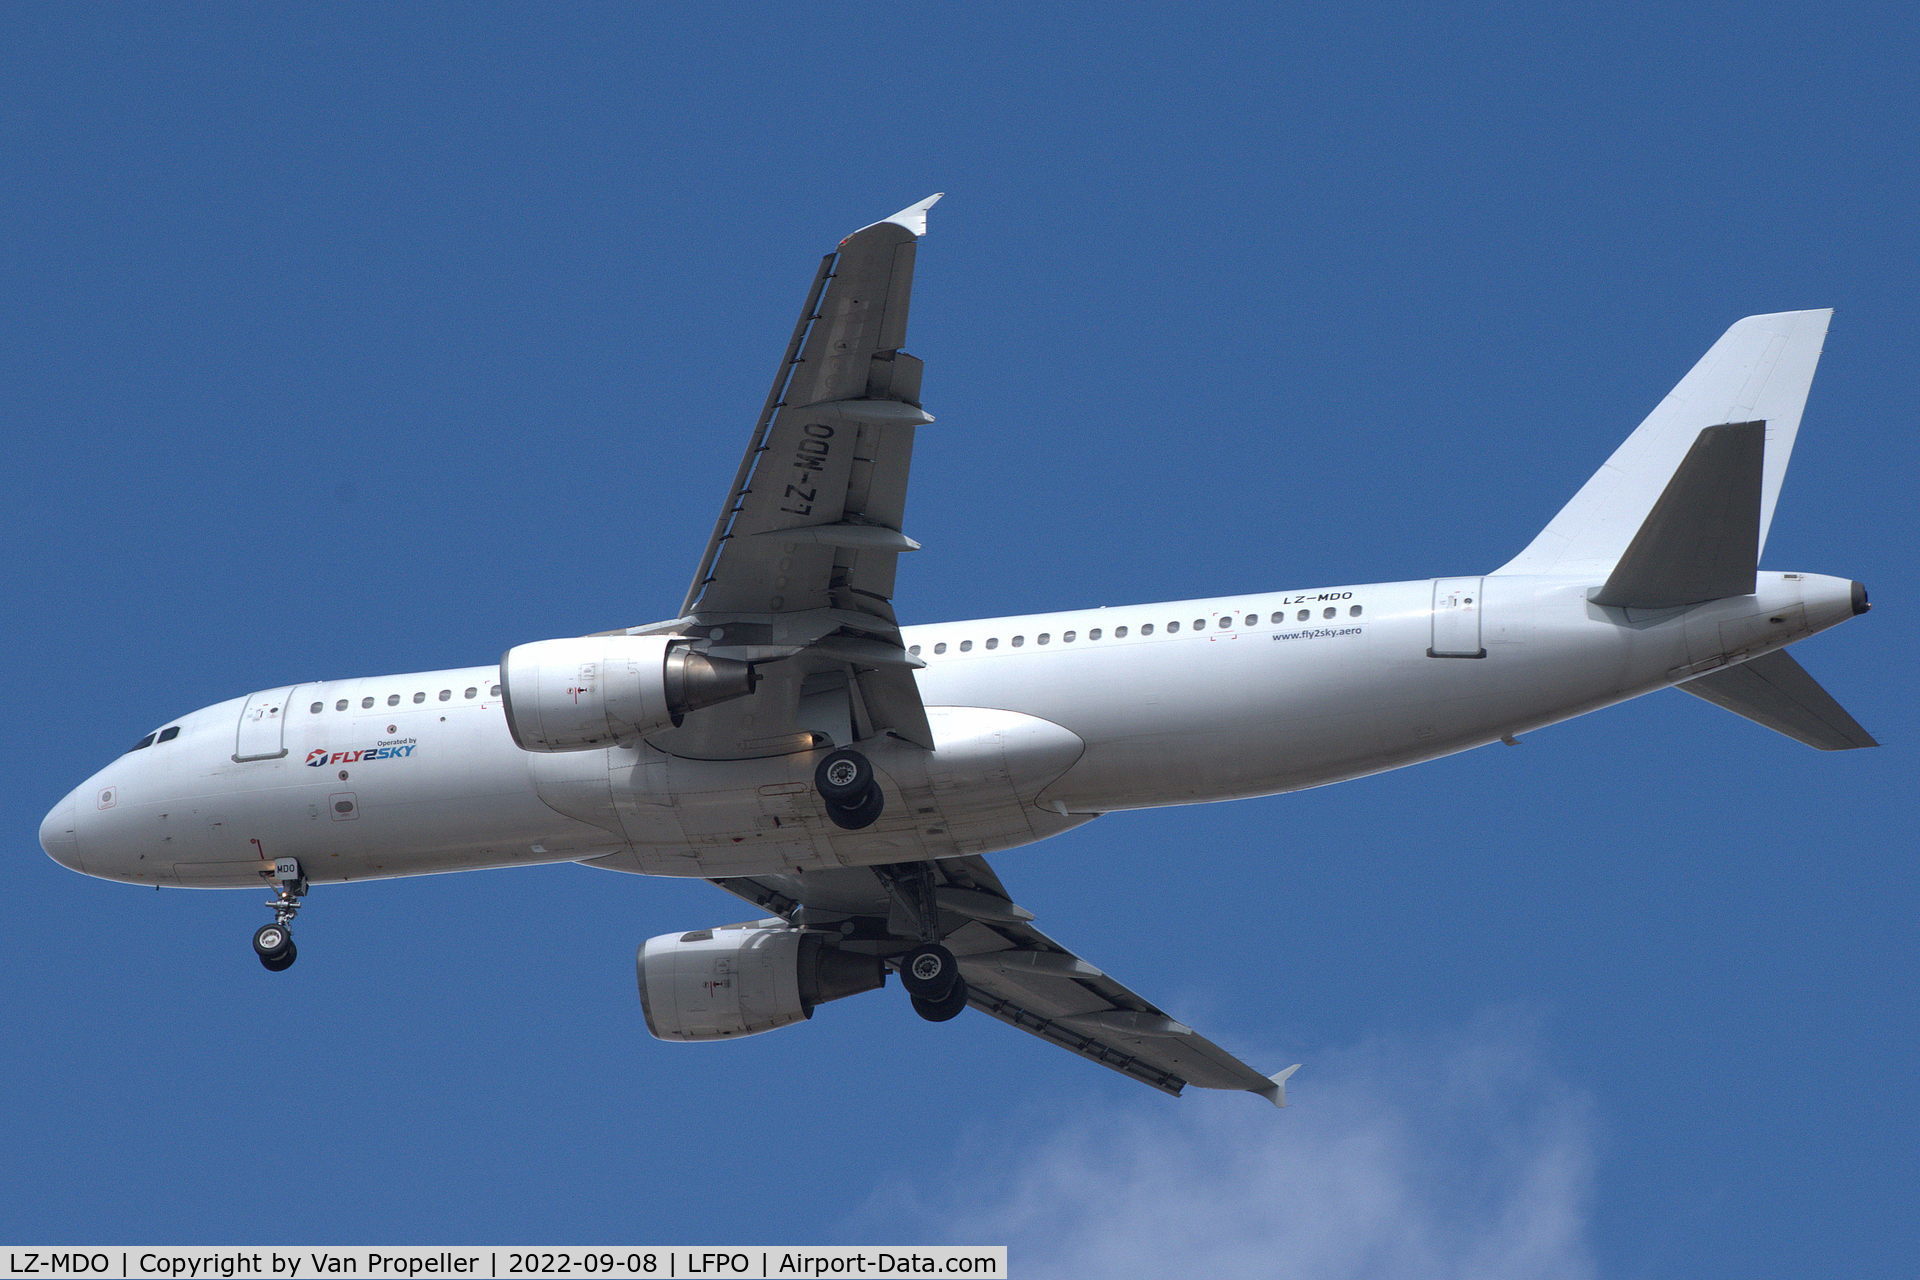 LZ-MDO, 1998 Airbus A320-214 C/N 0879, Fly2Sky Airbus A320-214 on approach to Paris Orly airport, France